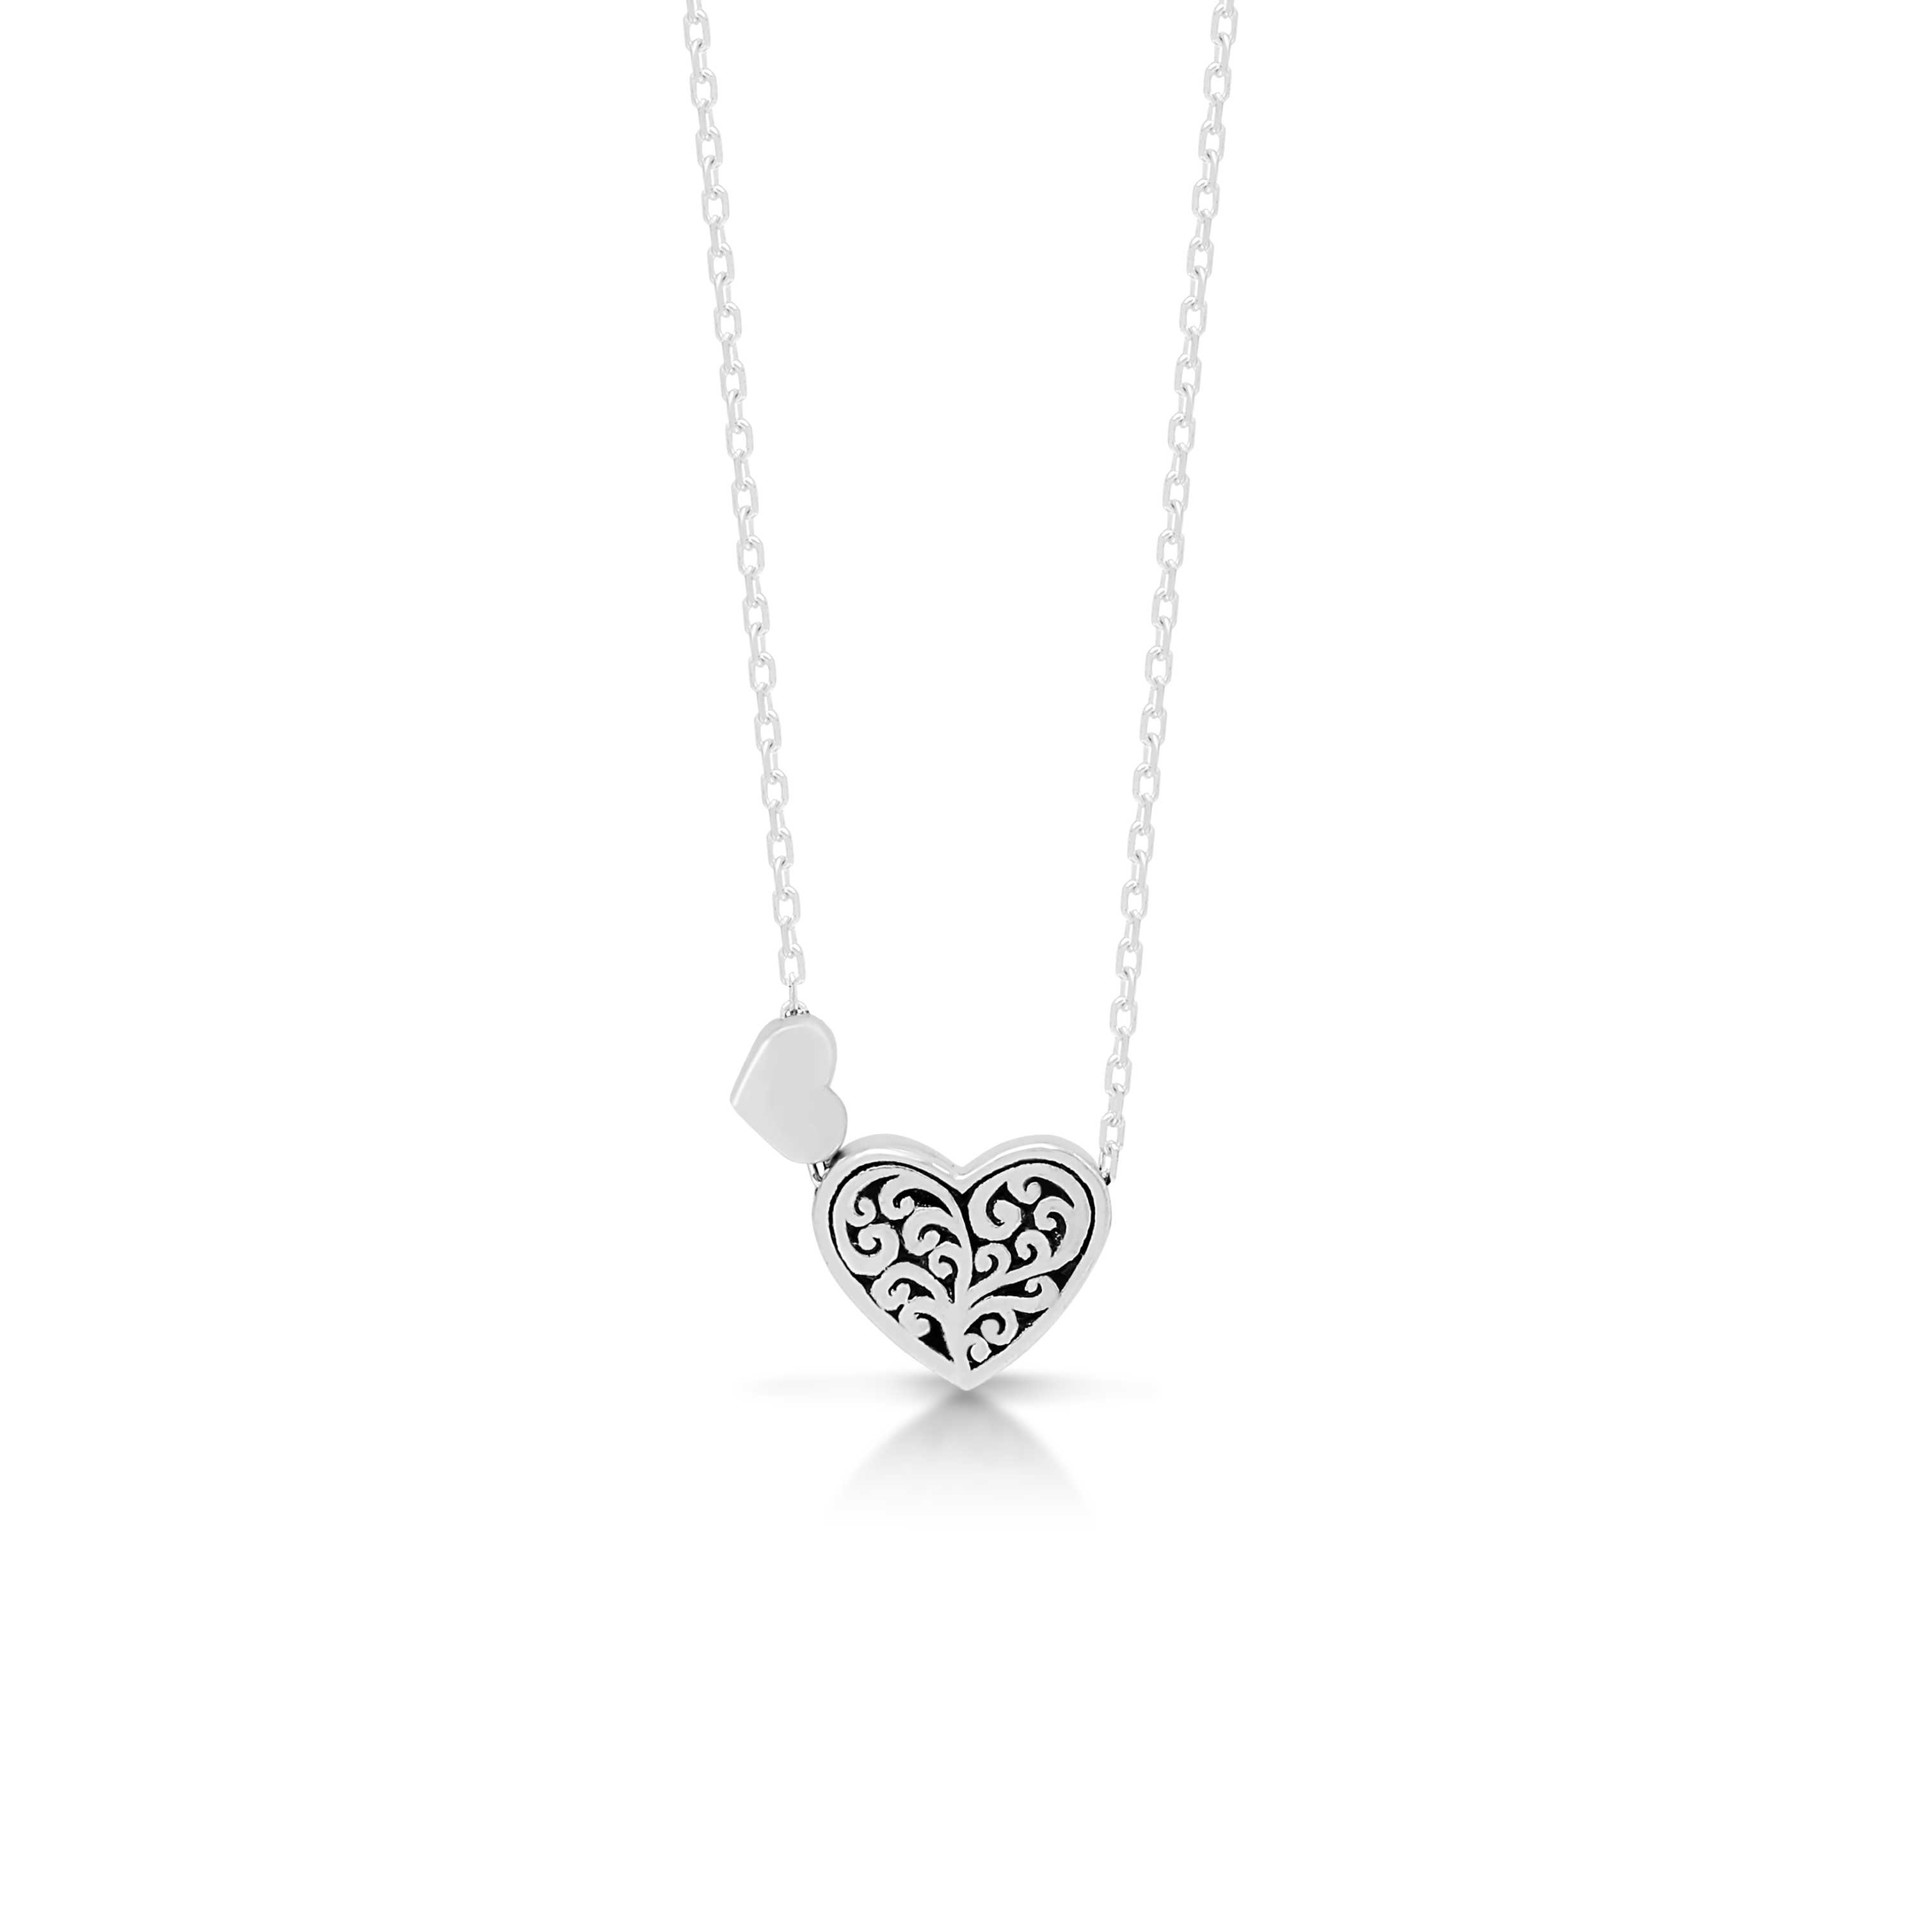 Hand Carved Sterling Silver Heart Pendant with Sister Heart by Lois Hill